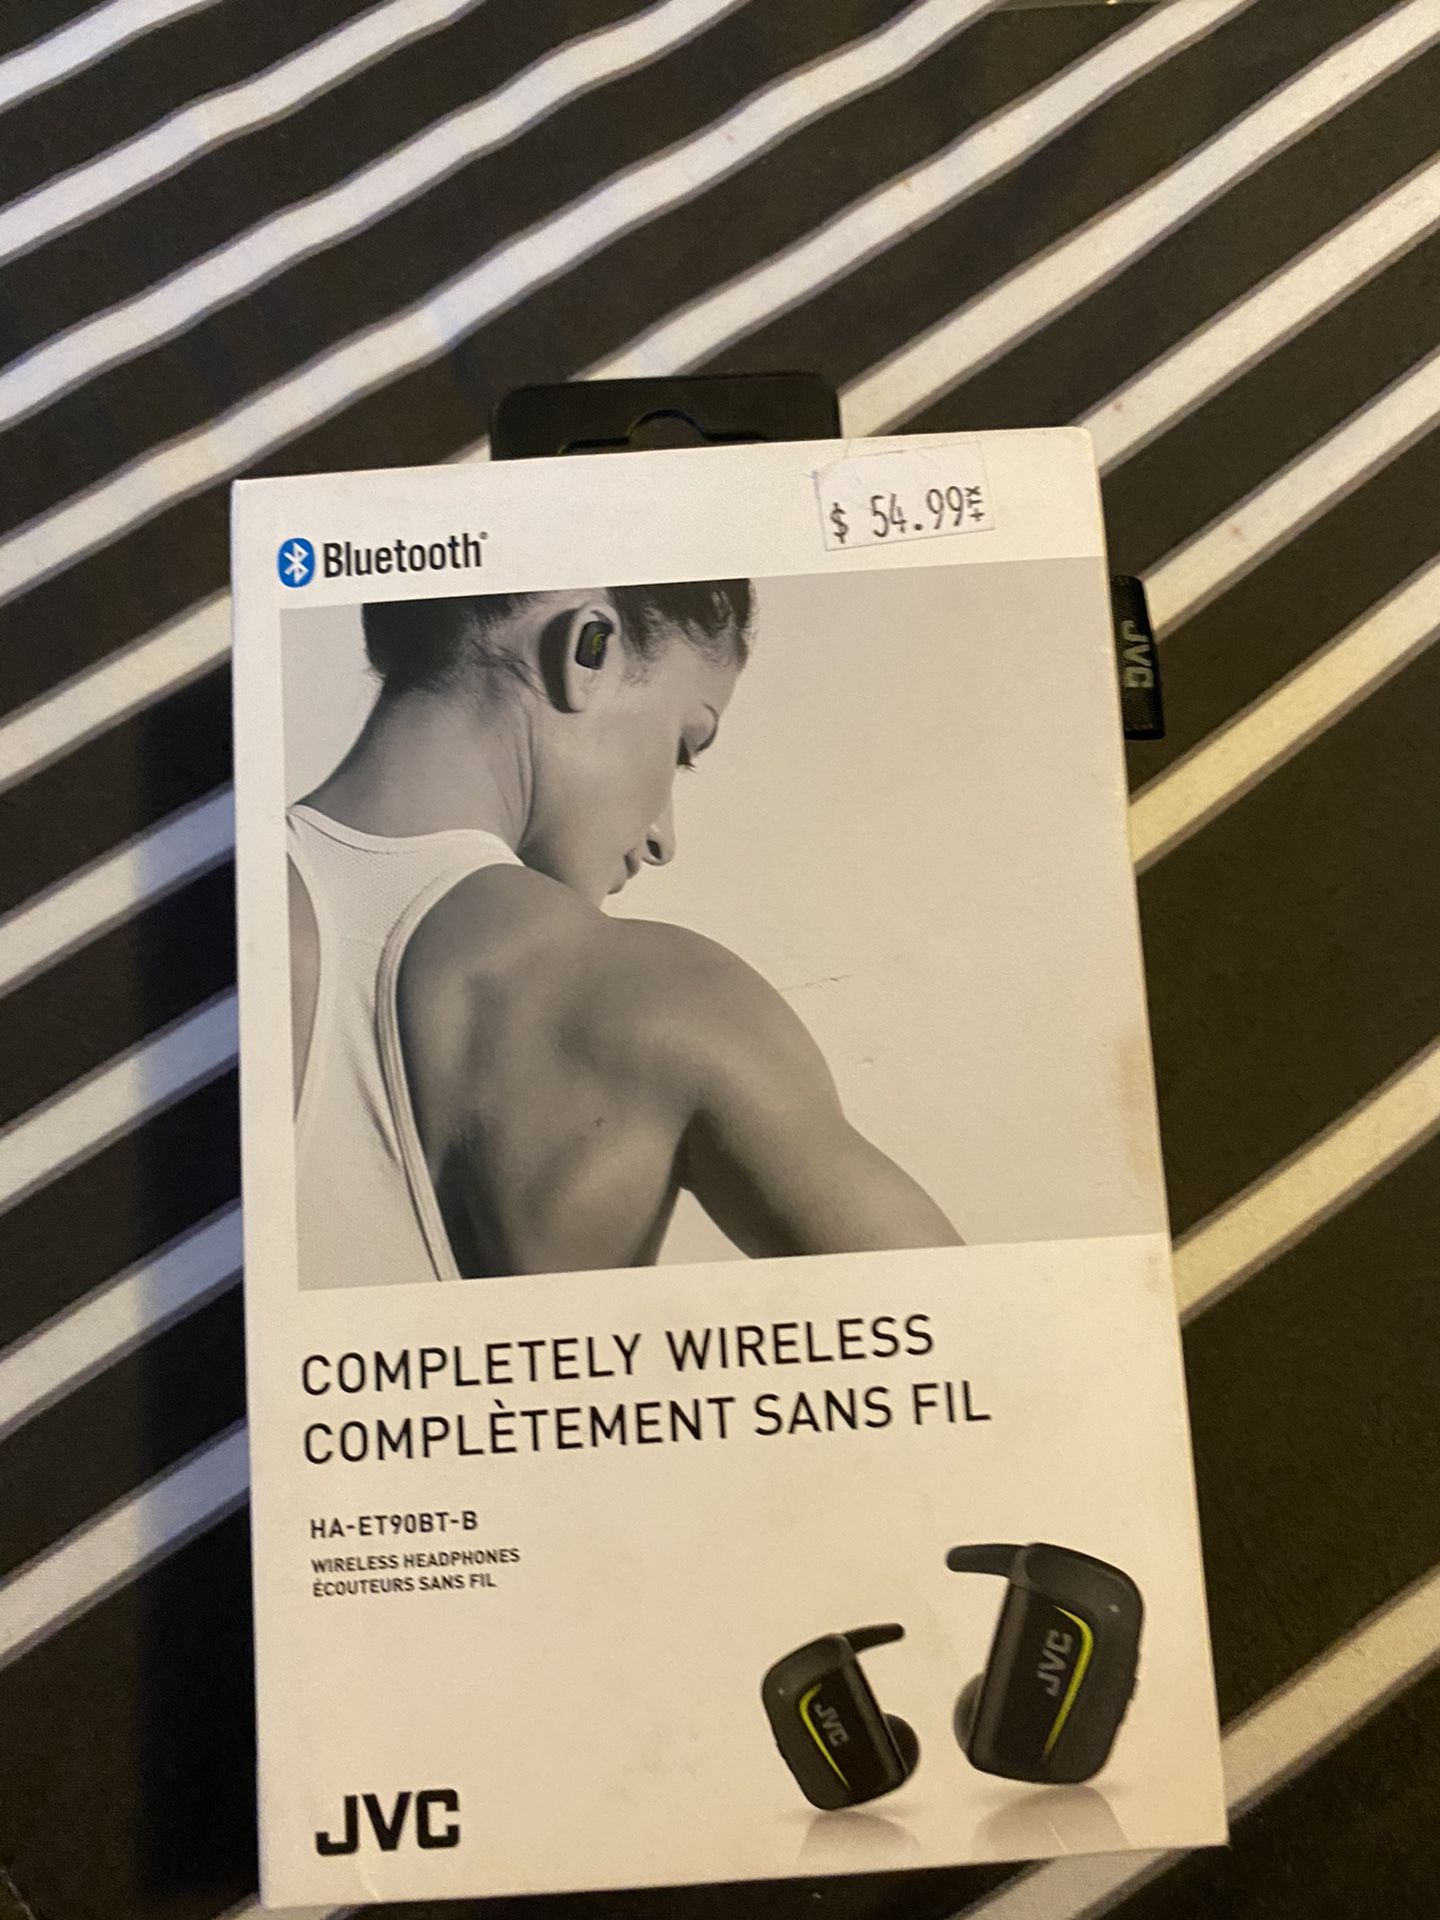 Completely wireless earbuds